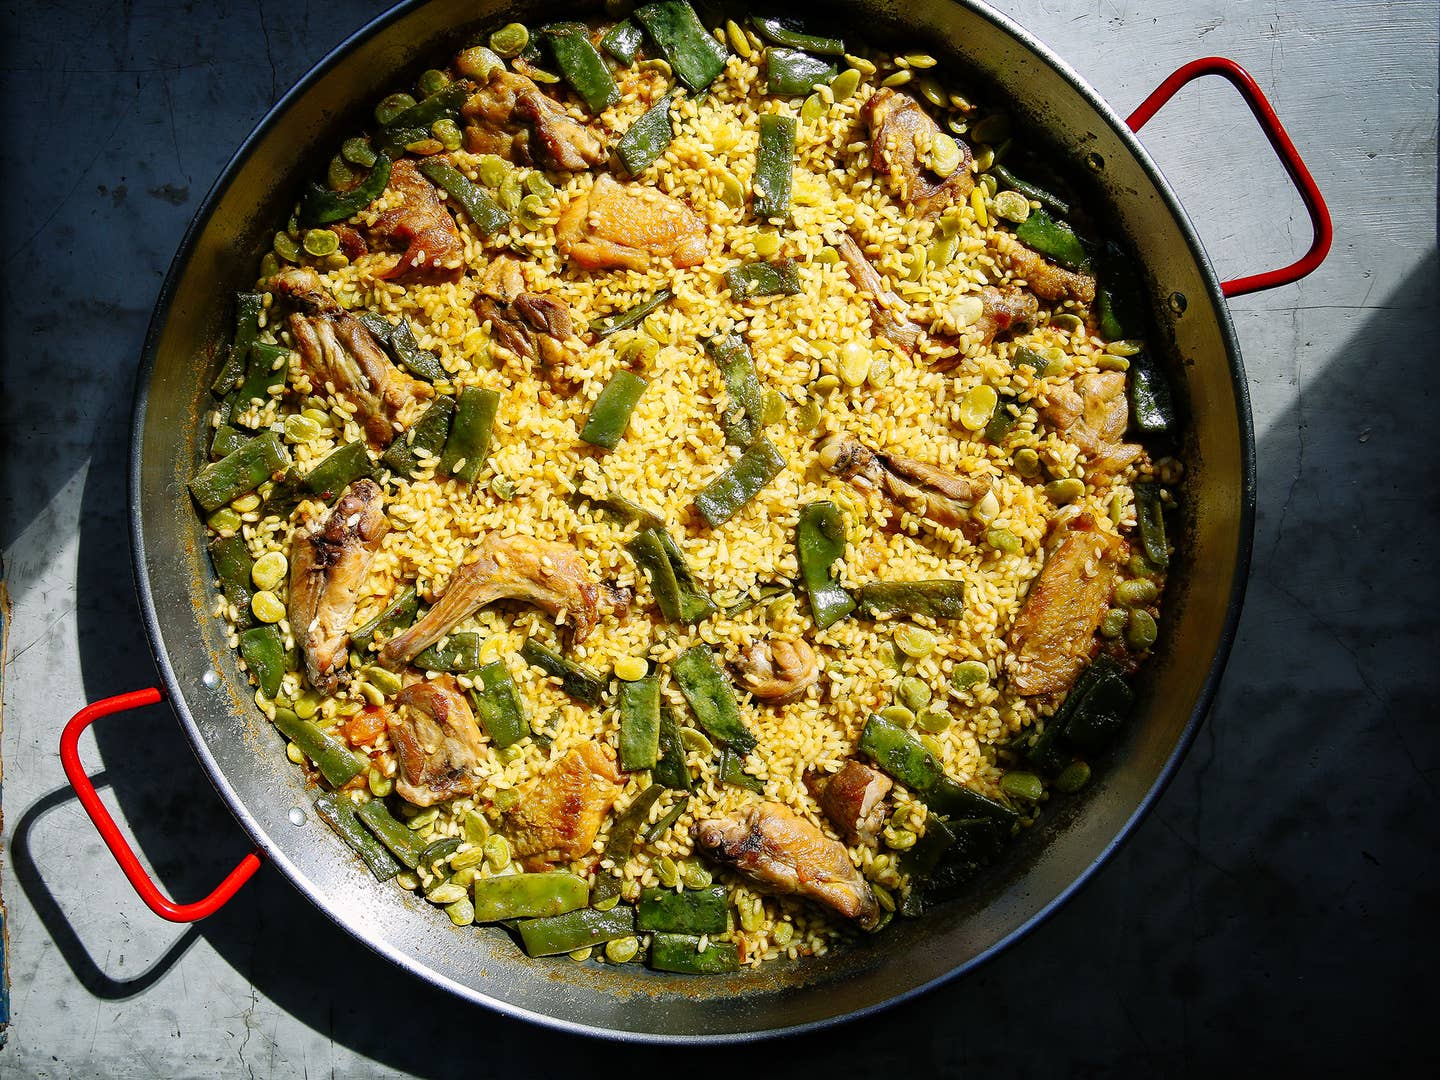 The Step-By-Step Guide to Making Perfect Paella